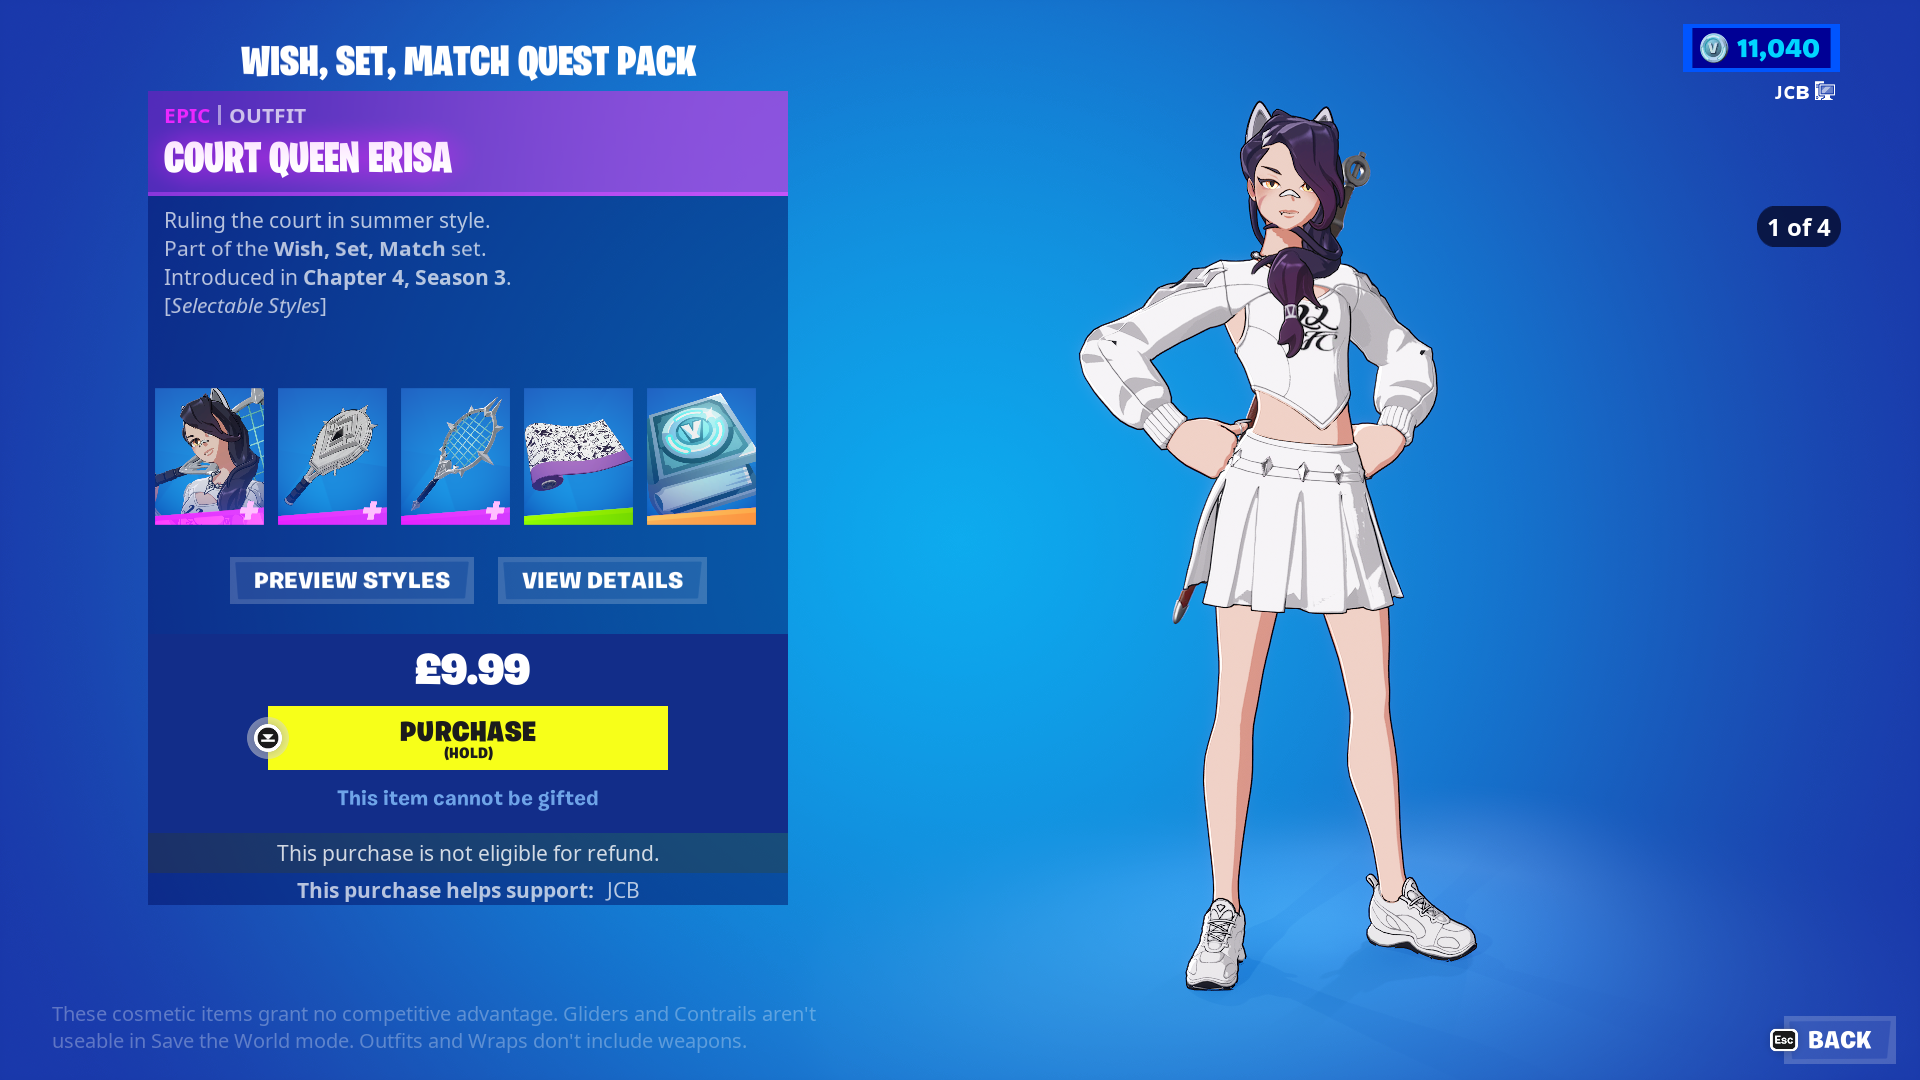 New Wish, Set, Match Quest Pack Available Now